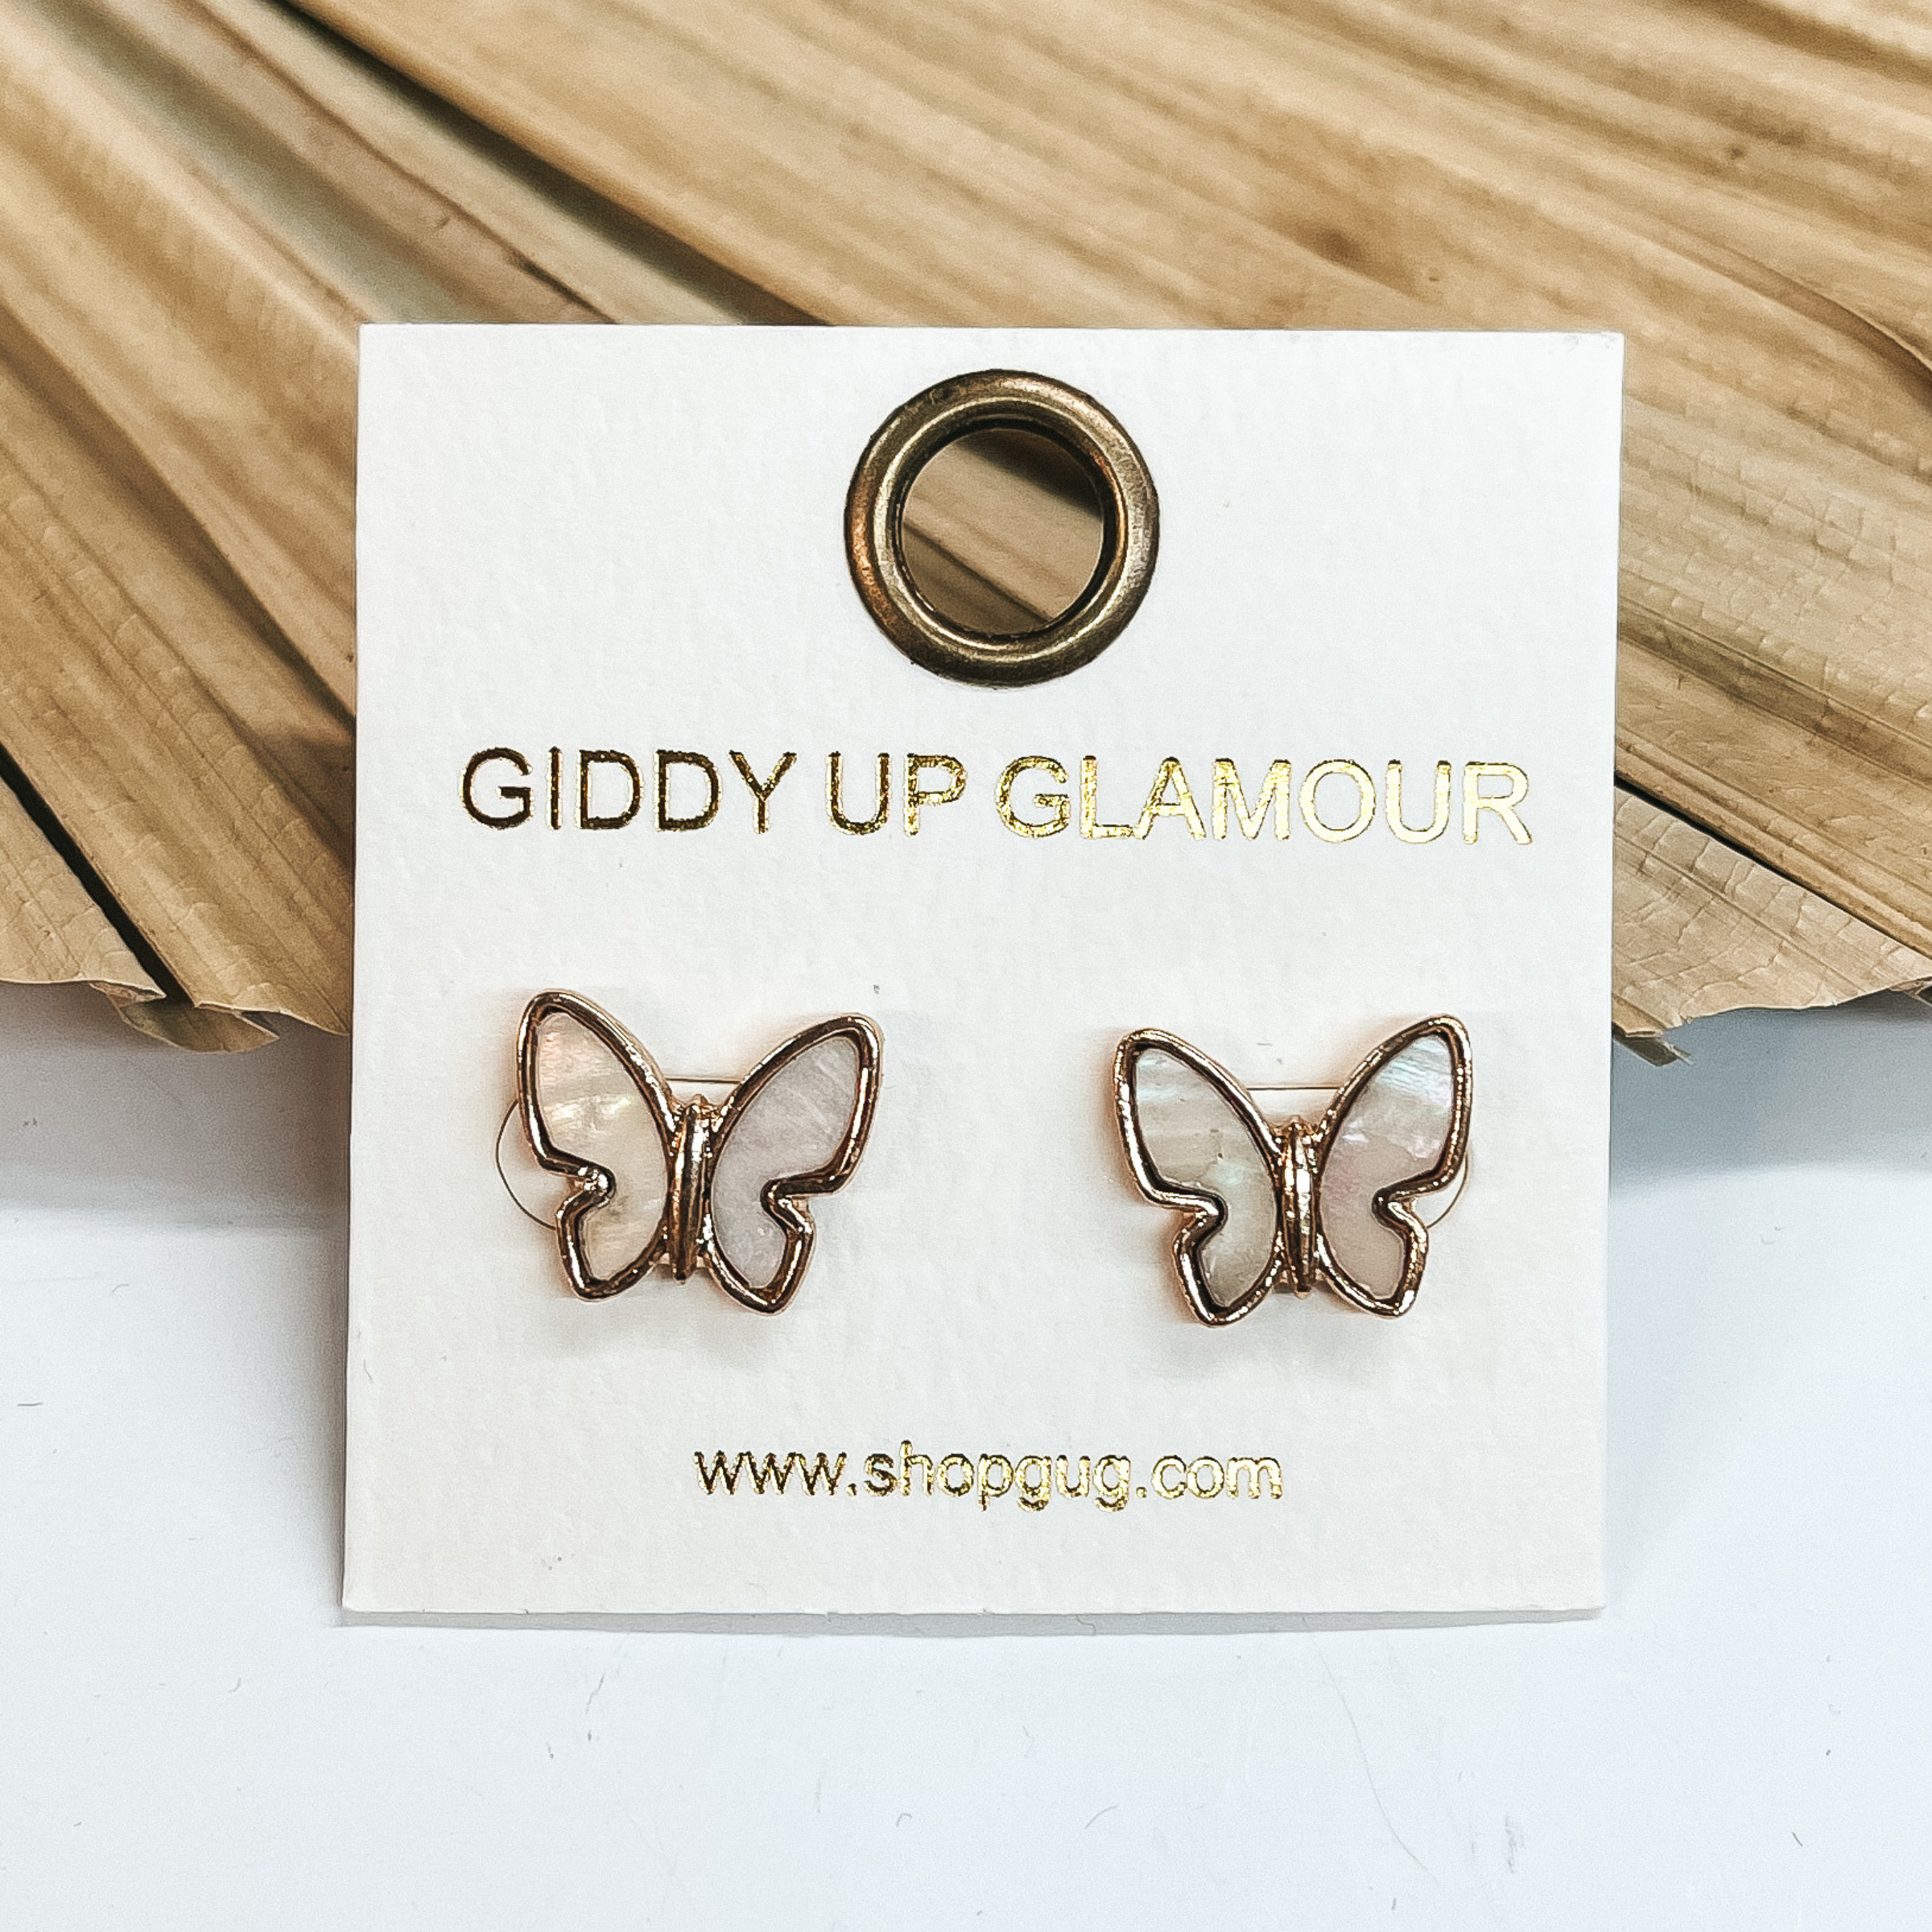 These are mother of pearl butterfly earrings with  a gold setting. Taken on a white background and leaned up against a dried up palm leaf.